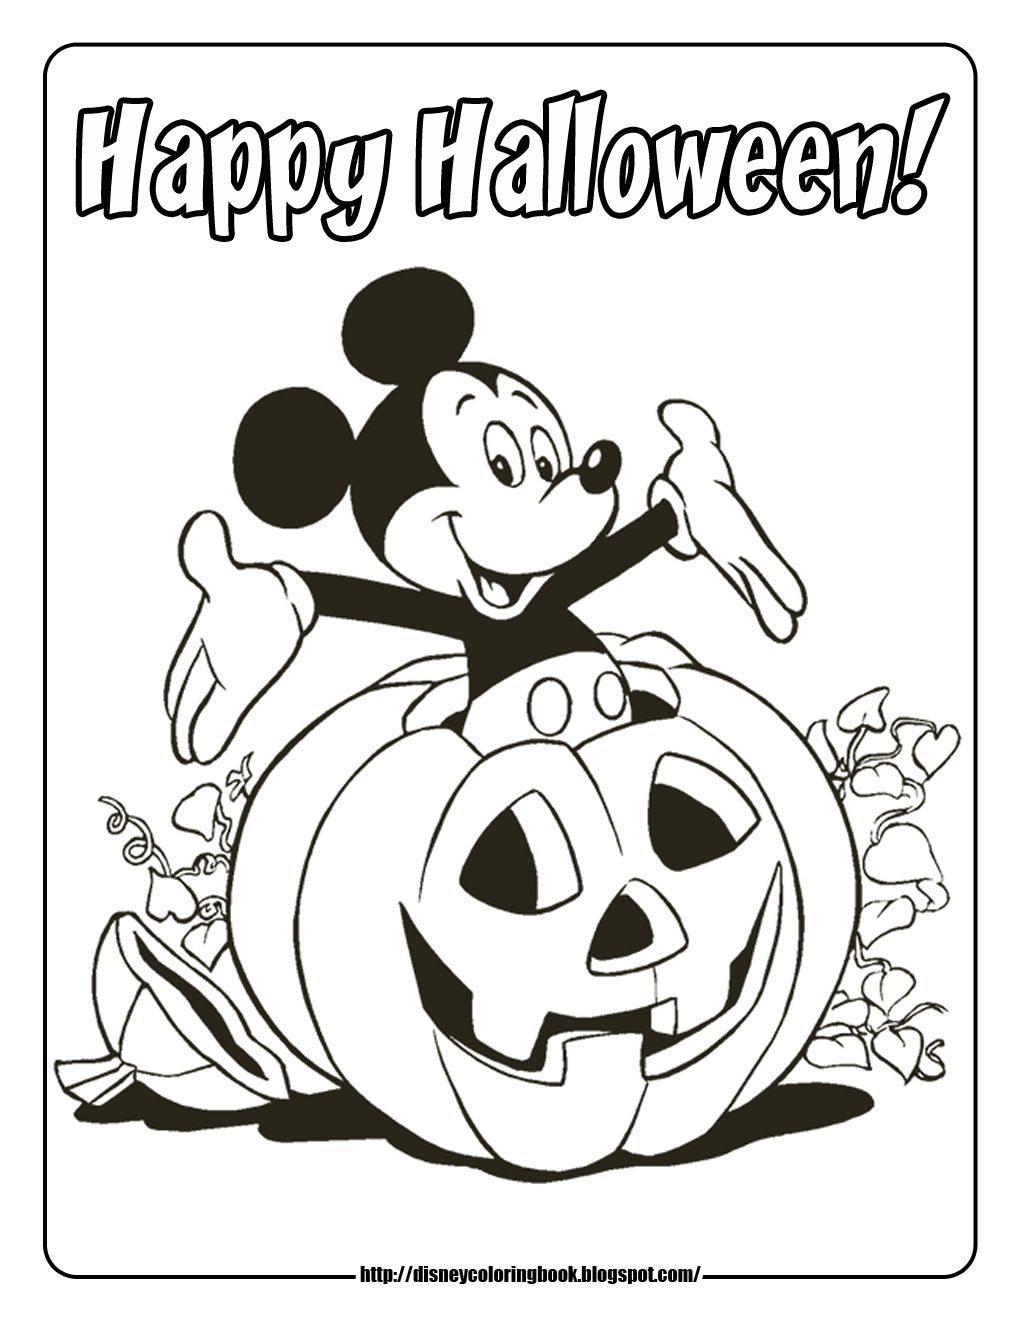 Disney coloring pages and sheets for kids mickey and friends halloween freâ halloween para colorear halloween de mickey mouse dibujos de calabazas halloween